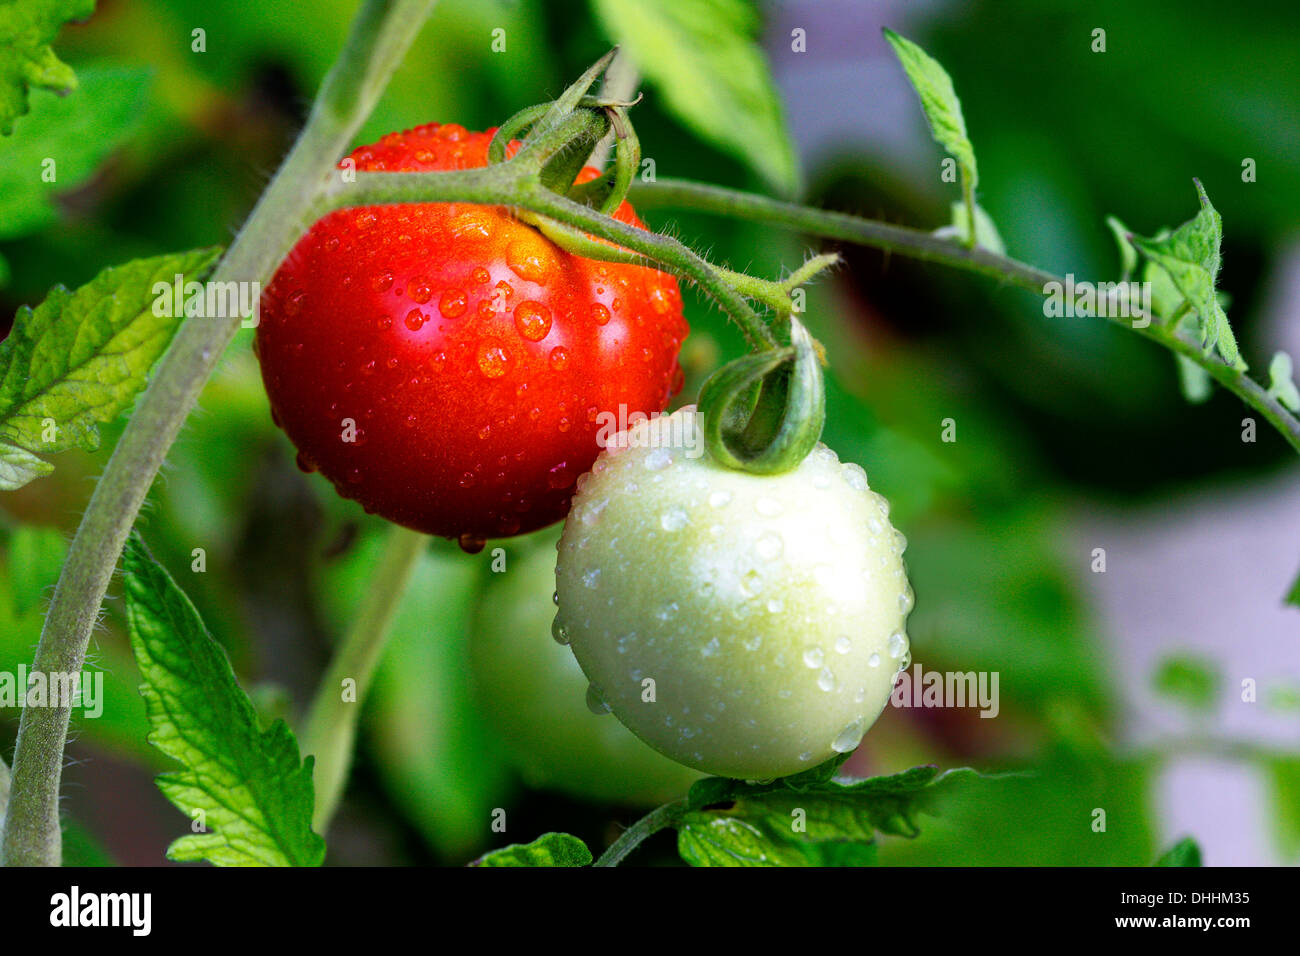 A red and a green tomato growing on the vine, with dew drops, Munich, Upper Bavaria, Bavaria, Germany Stock Photo